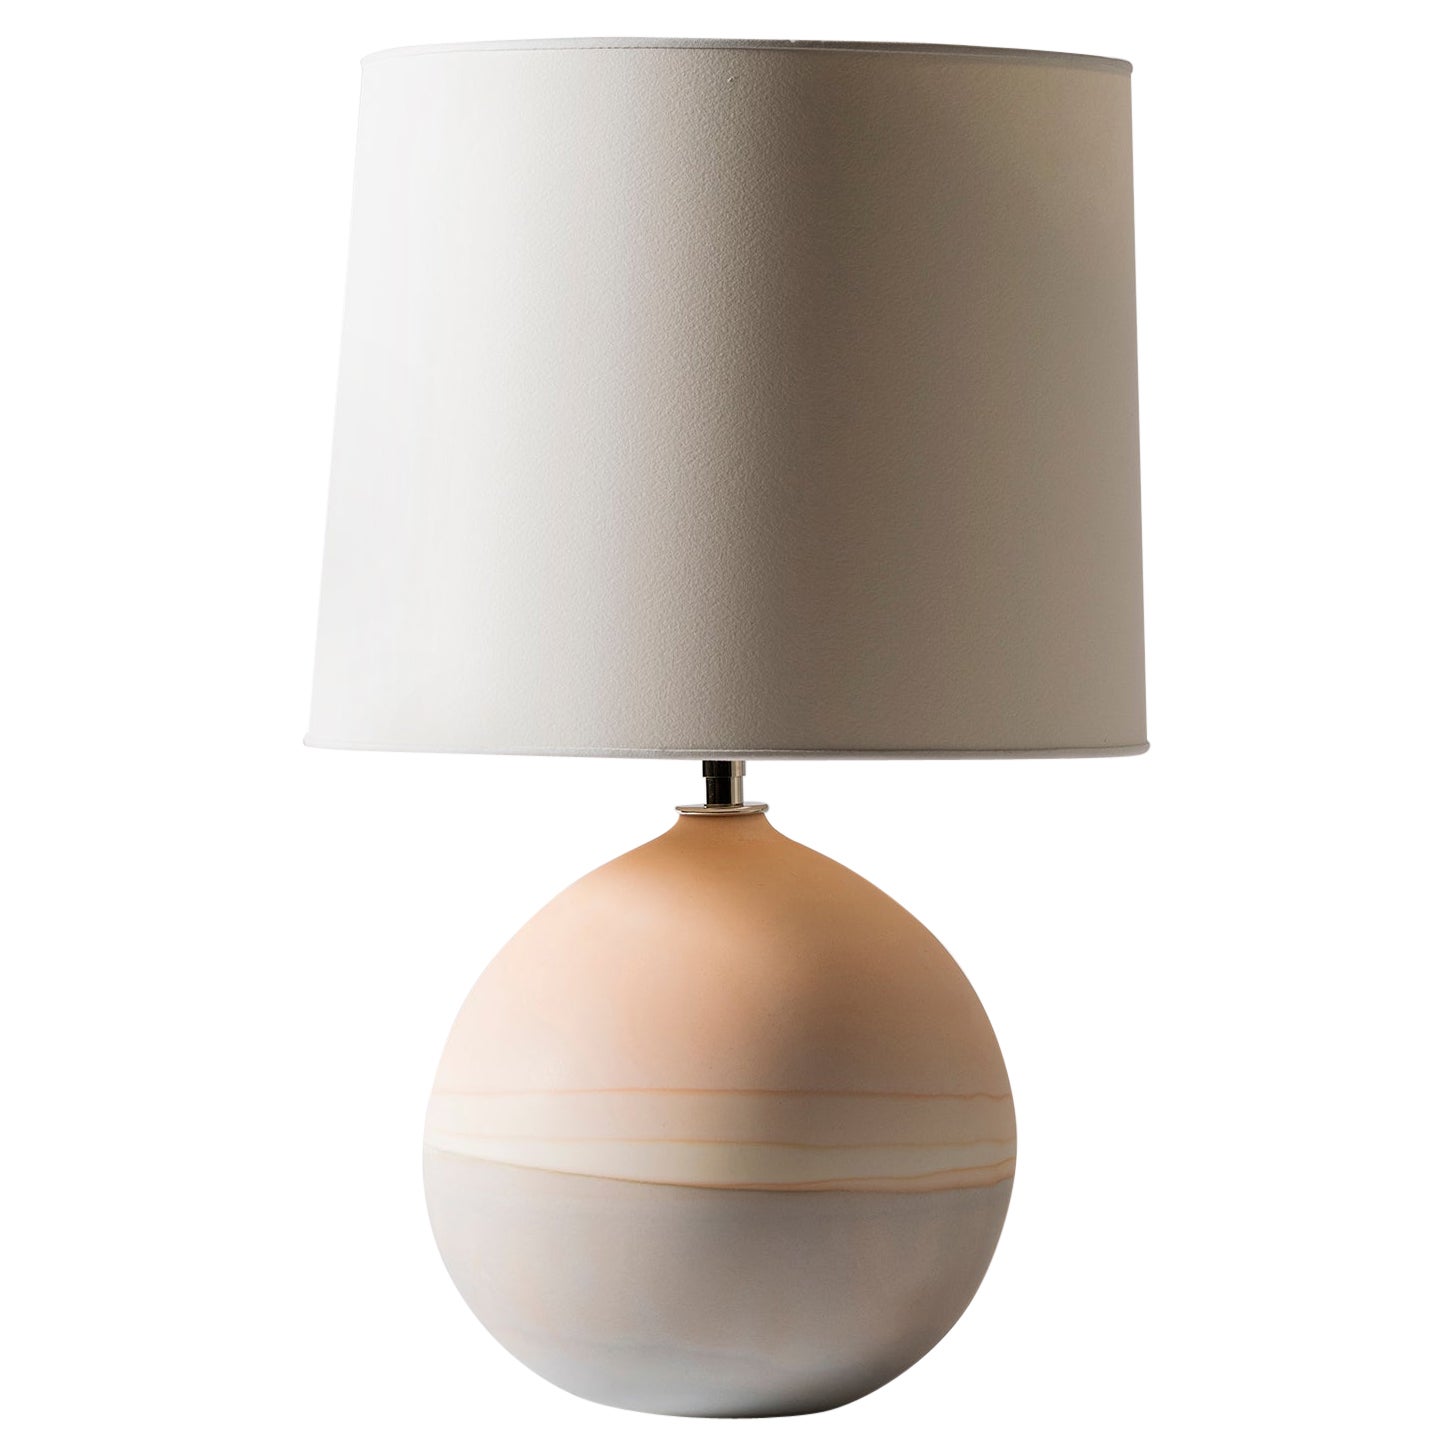 Contemporary Medium Round Saturn Table Lamp in Peach and Sage by Elyse Graham For Sale